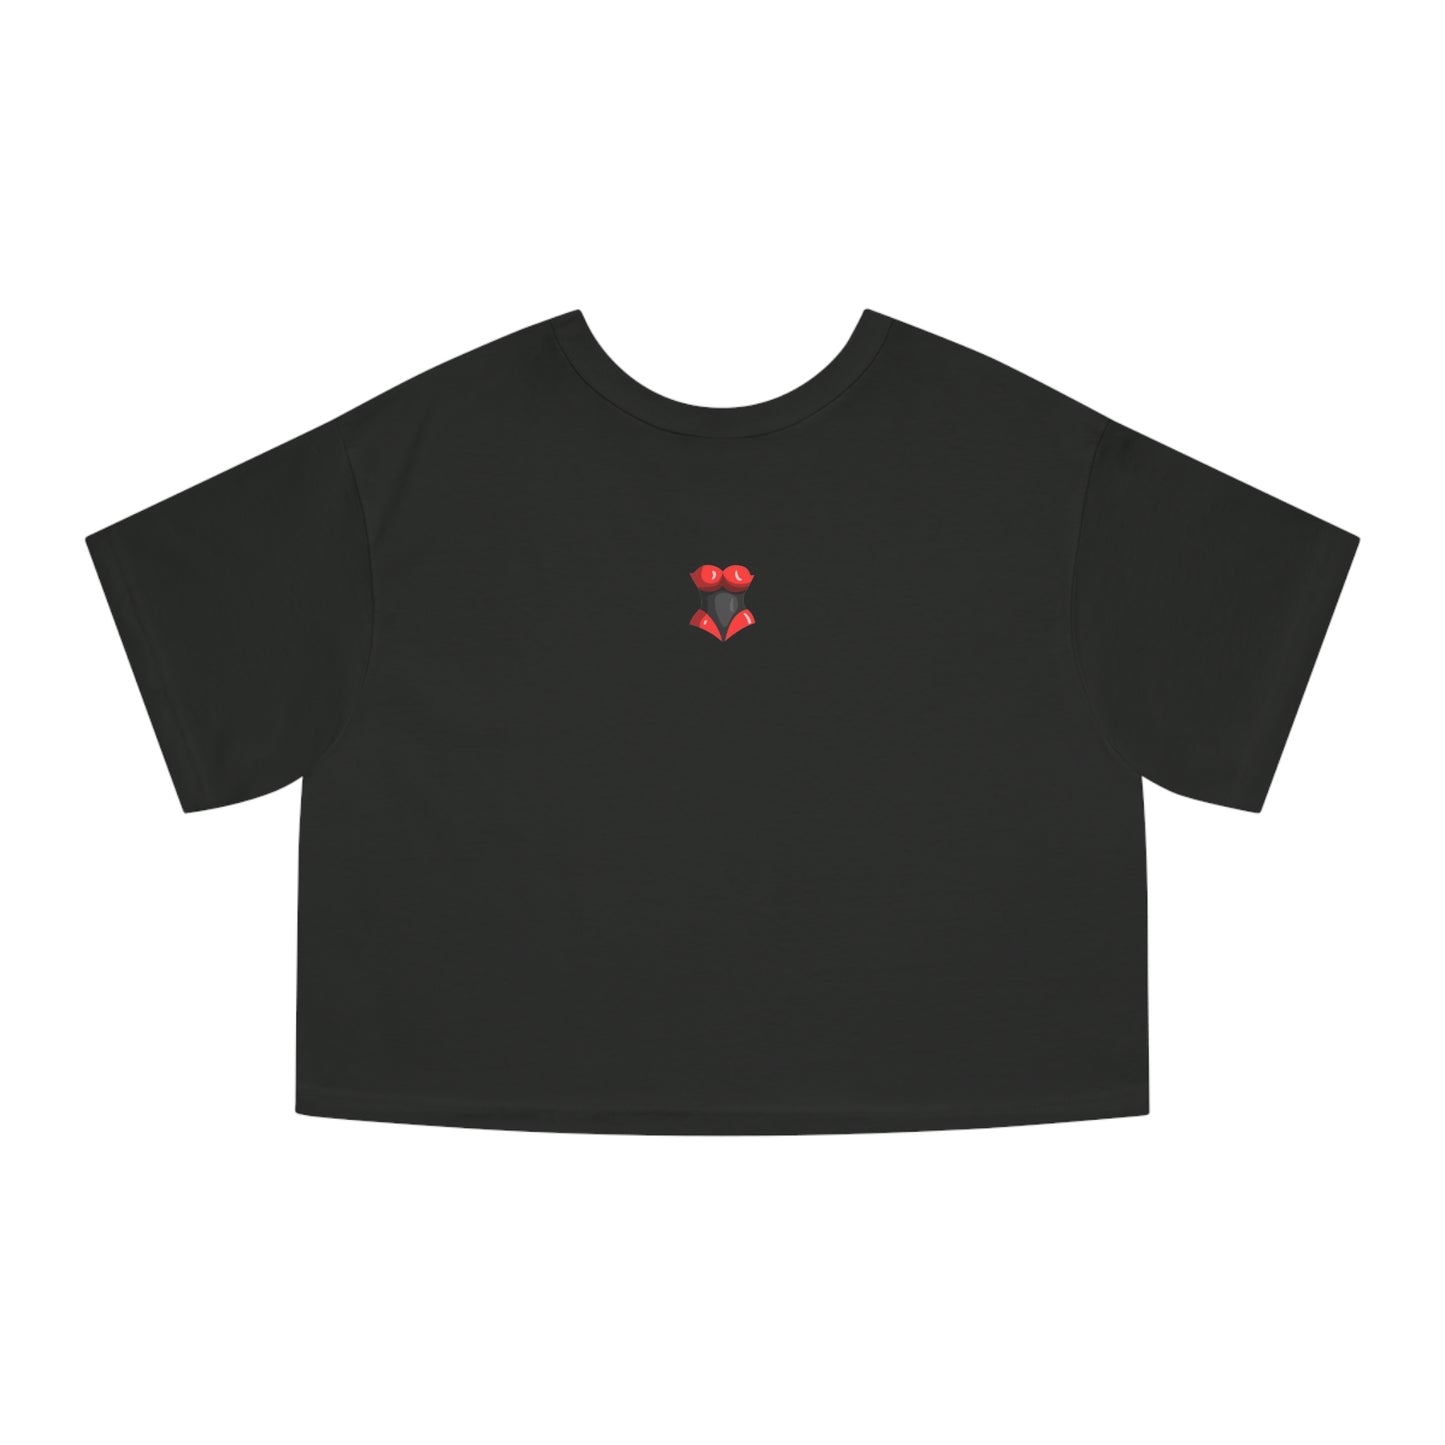 The submissive Smile | Champion Cropped T-Shirt